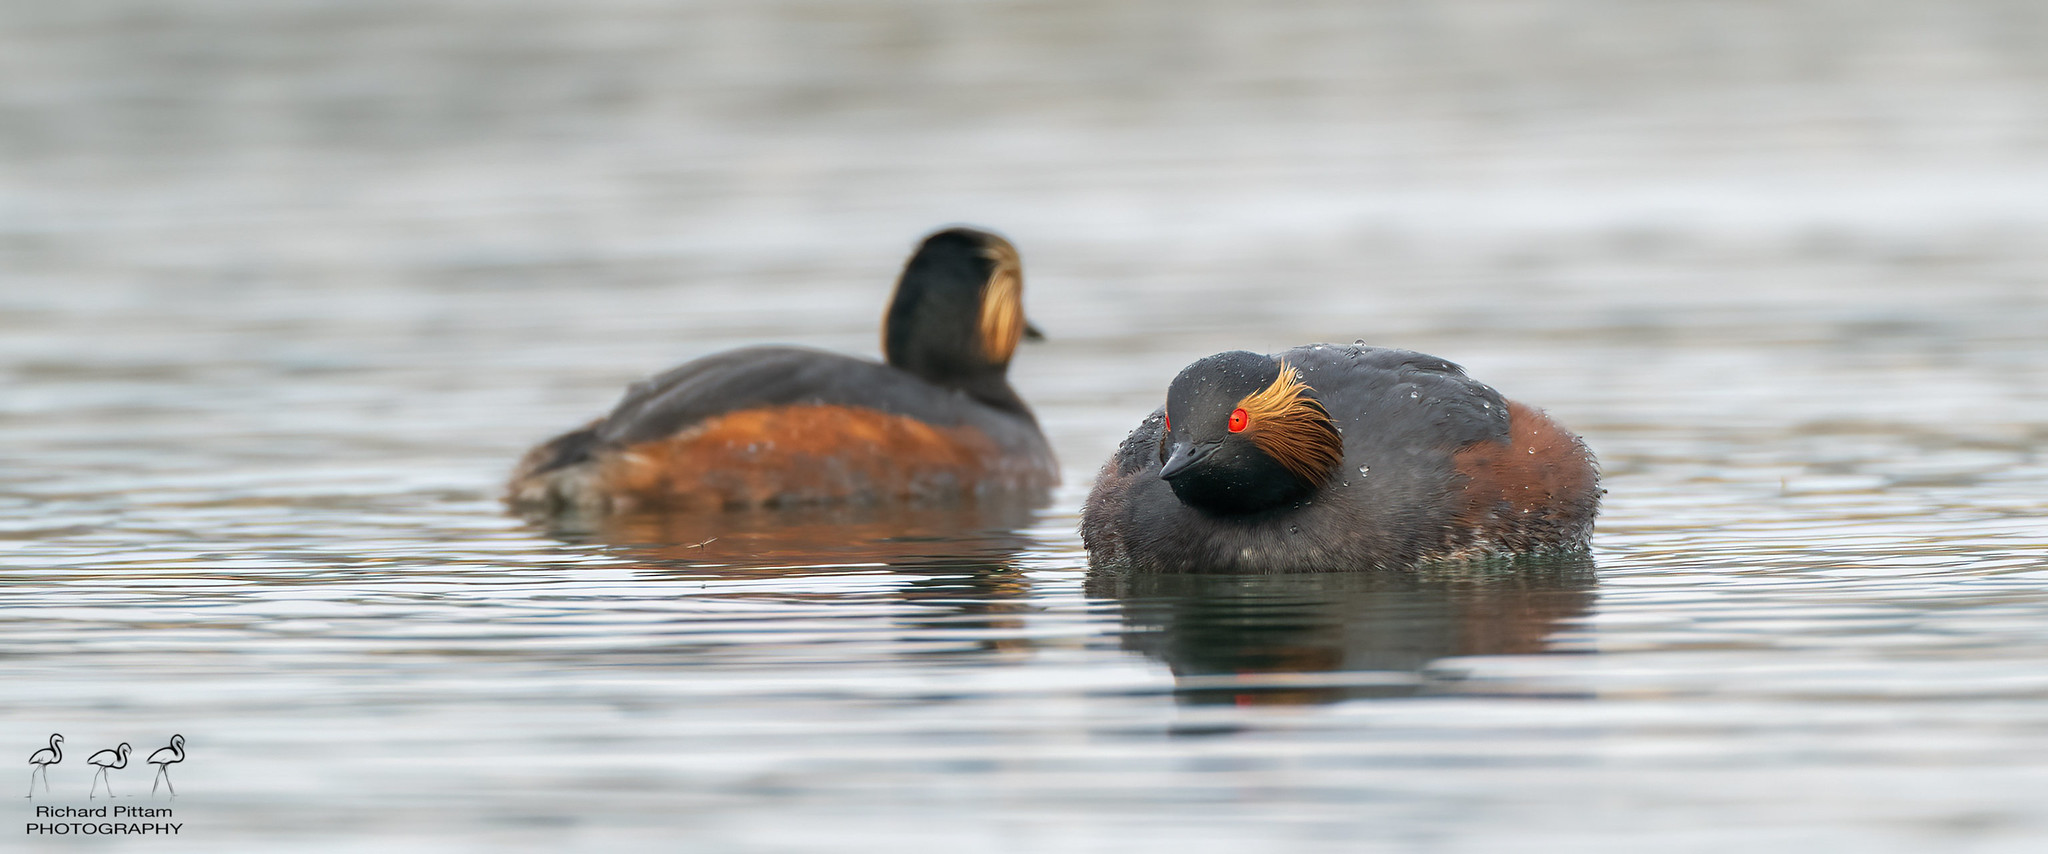 Black-necked Grebe - it didn’t like the Coot passing nearby.